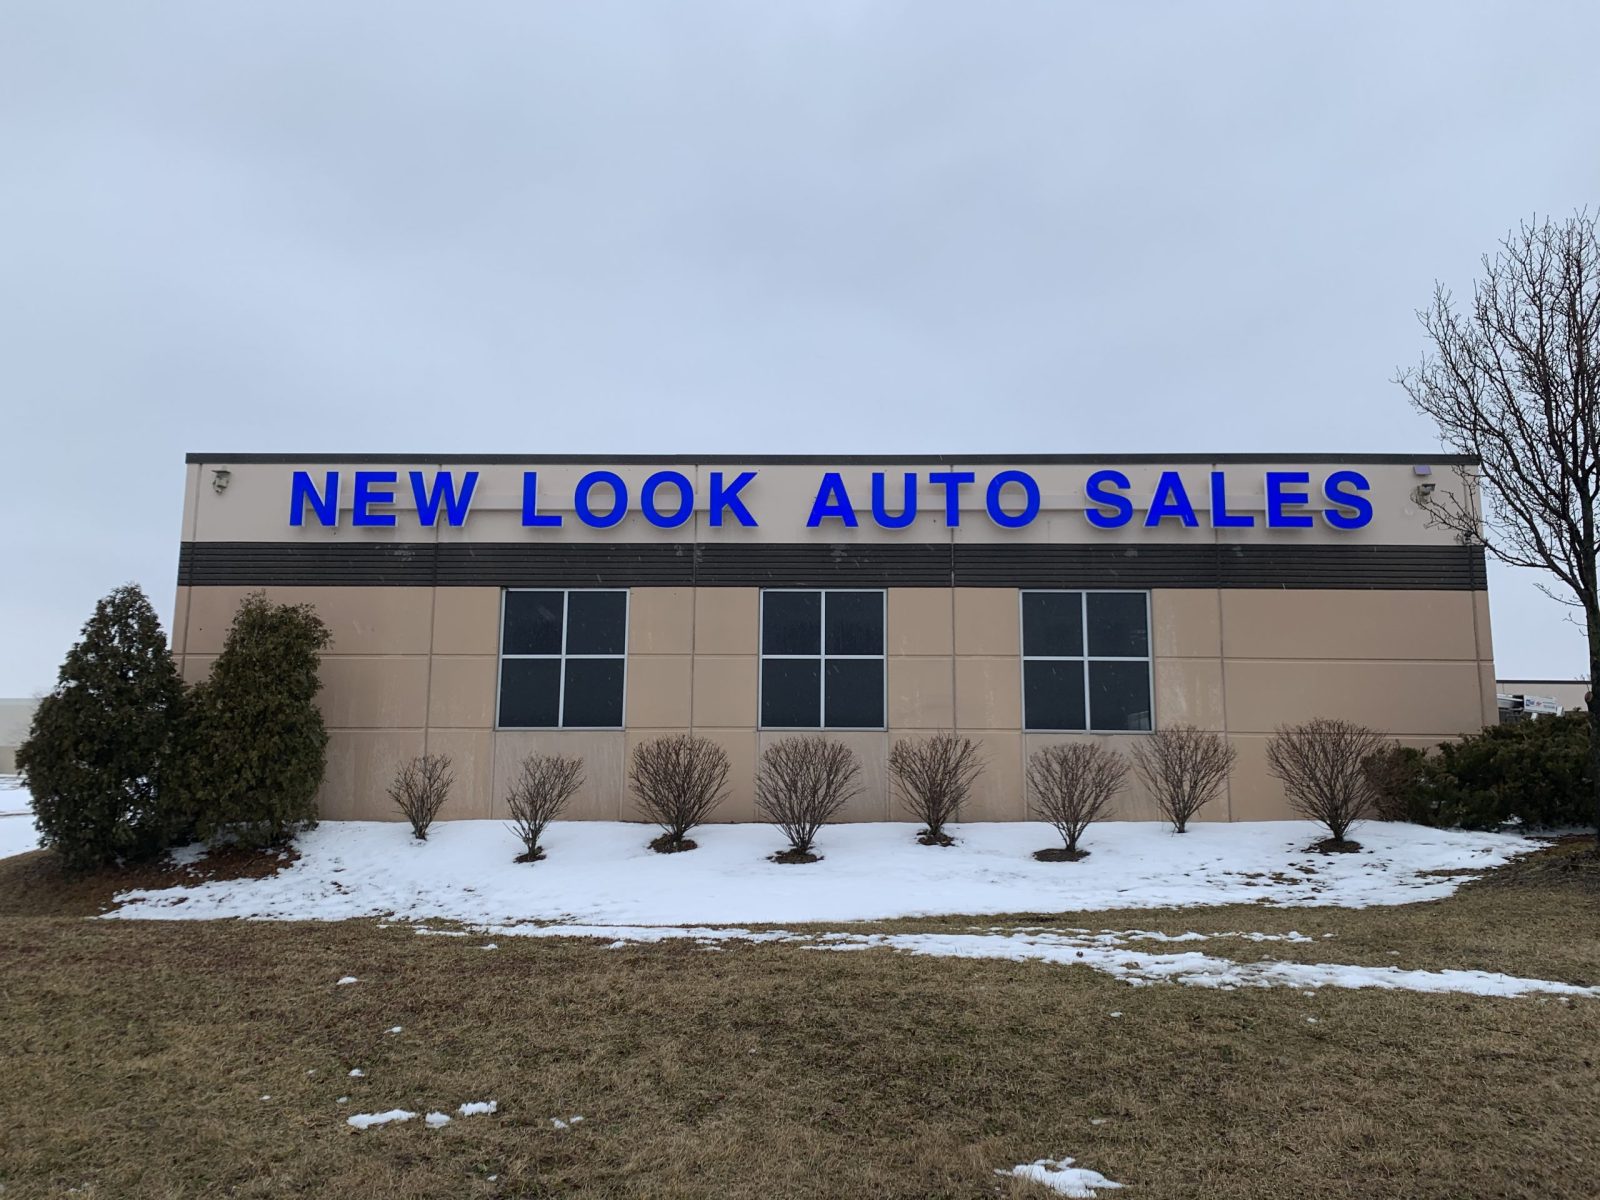 New Look Auto Sales Tinley Park LED Sign.